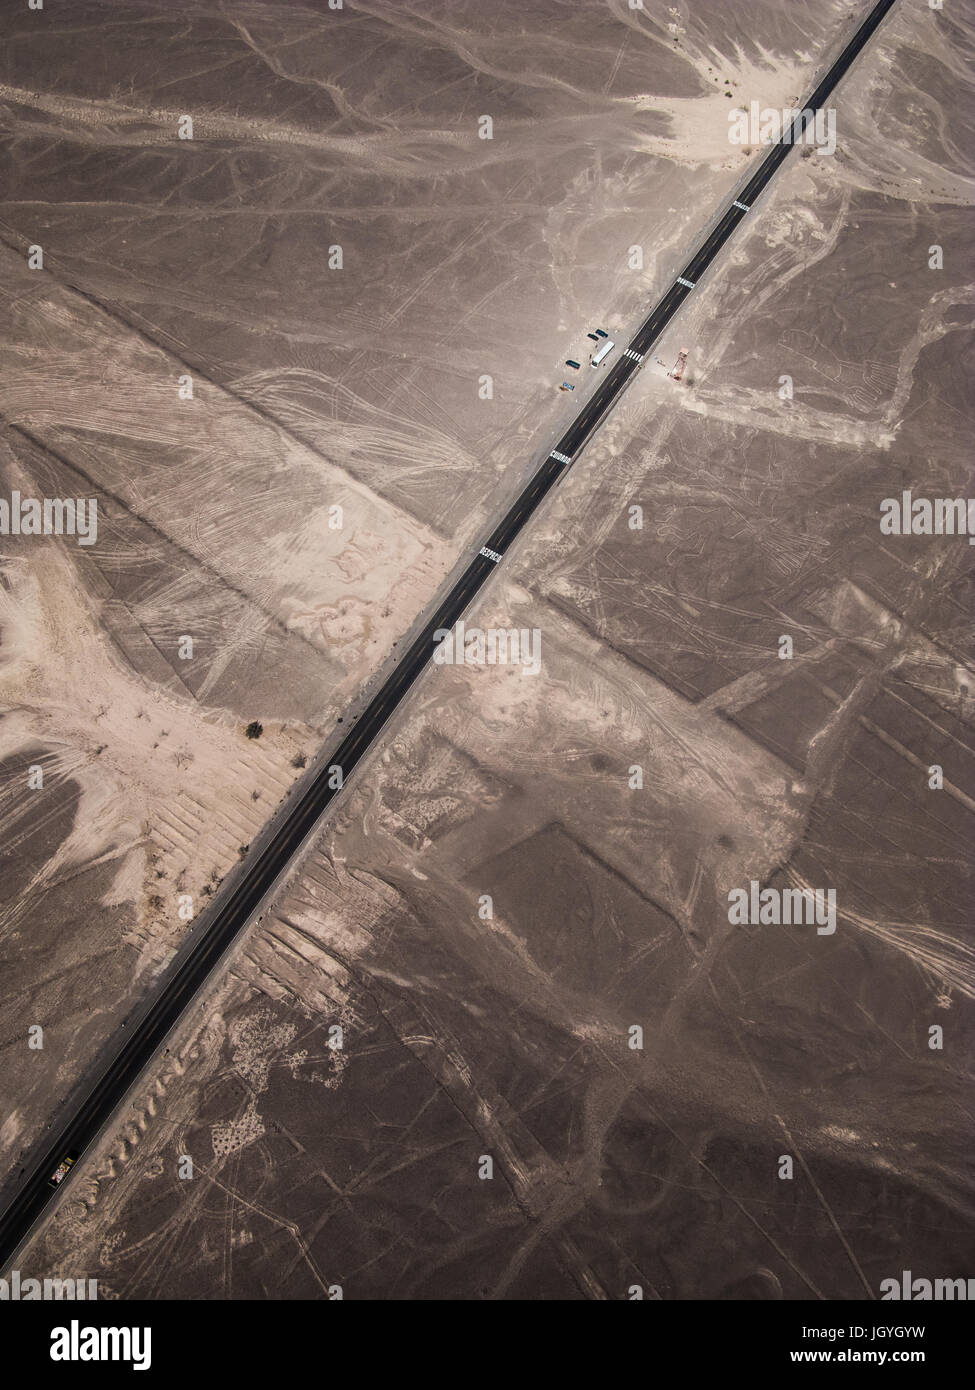 Pan-american highway and Nazca lines view from small plane, Peru Stock Photo